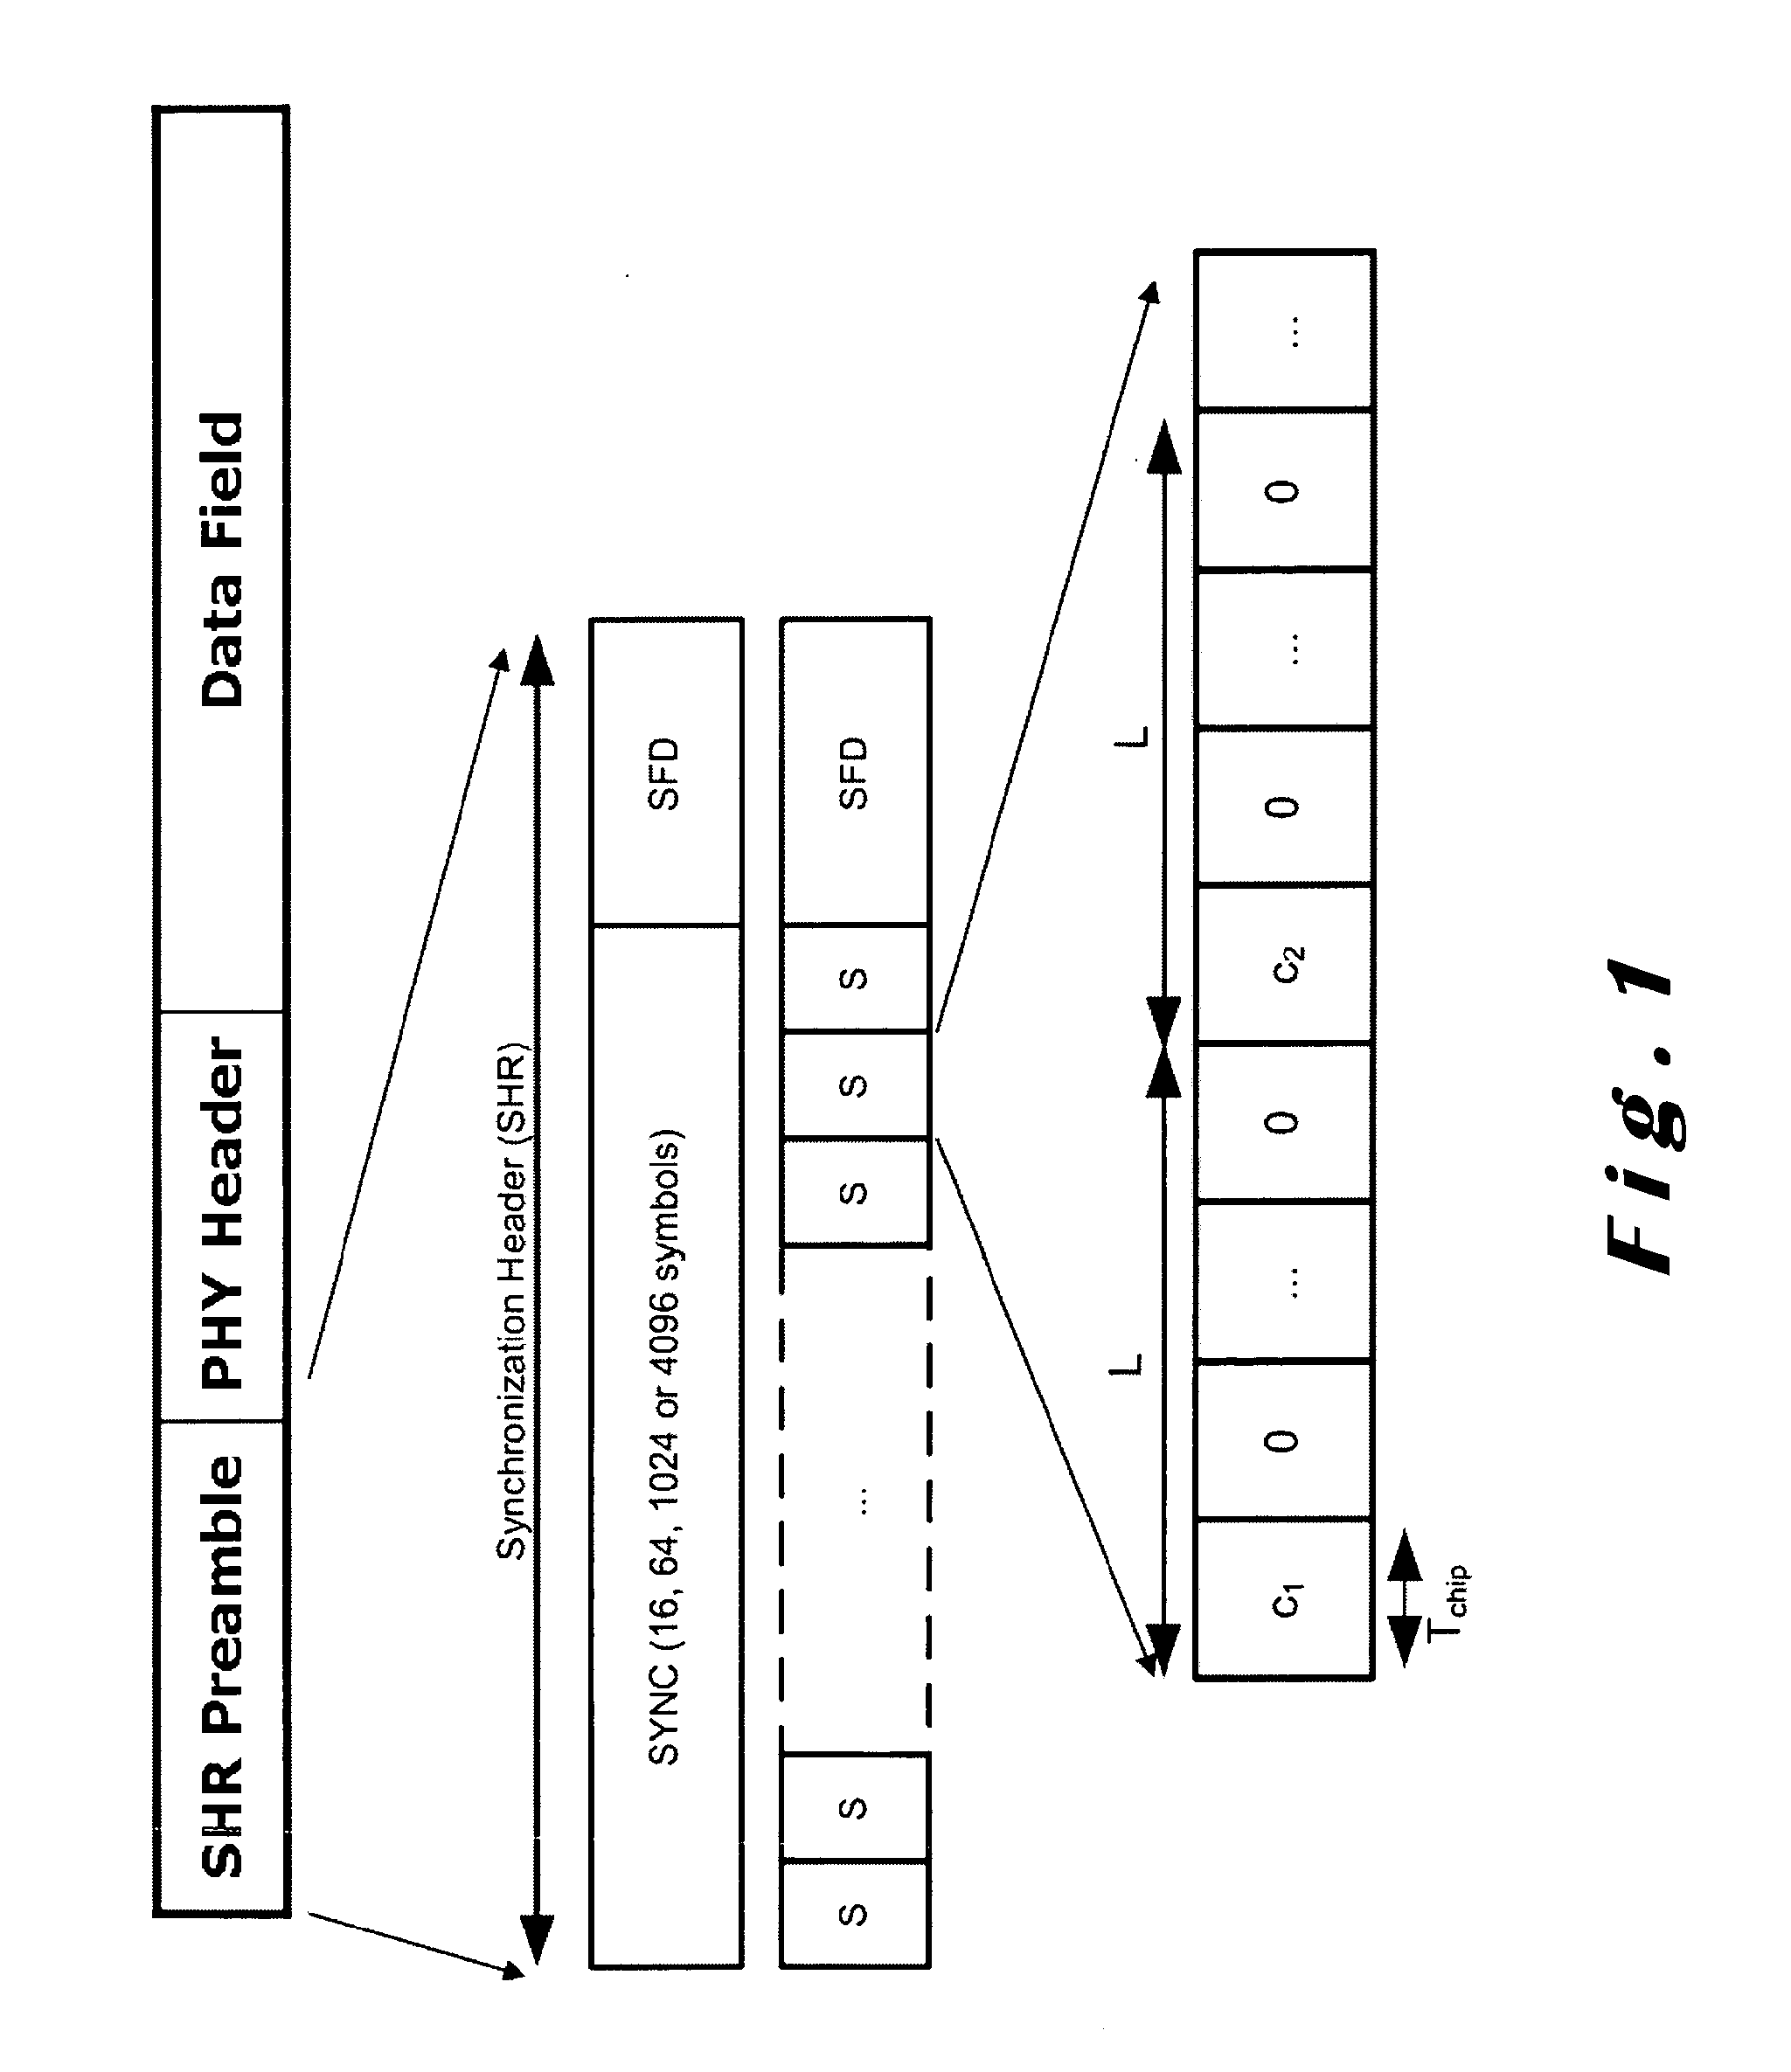 Methods for Fast and Low-Power UWB IR Baseband Receiver Synchronization